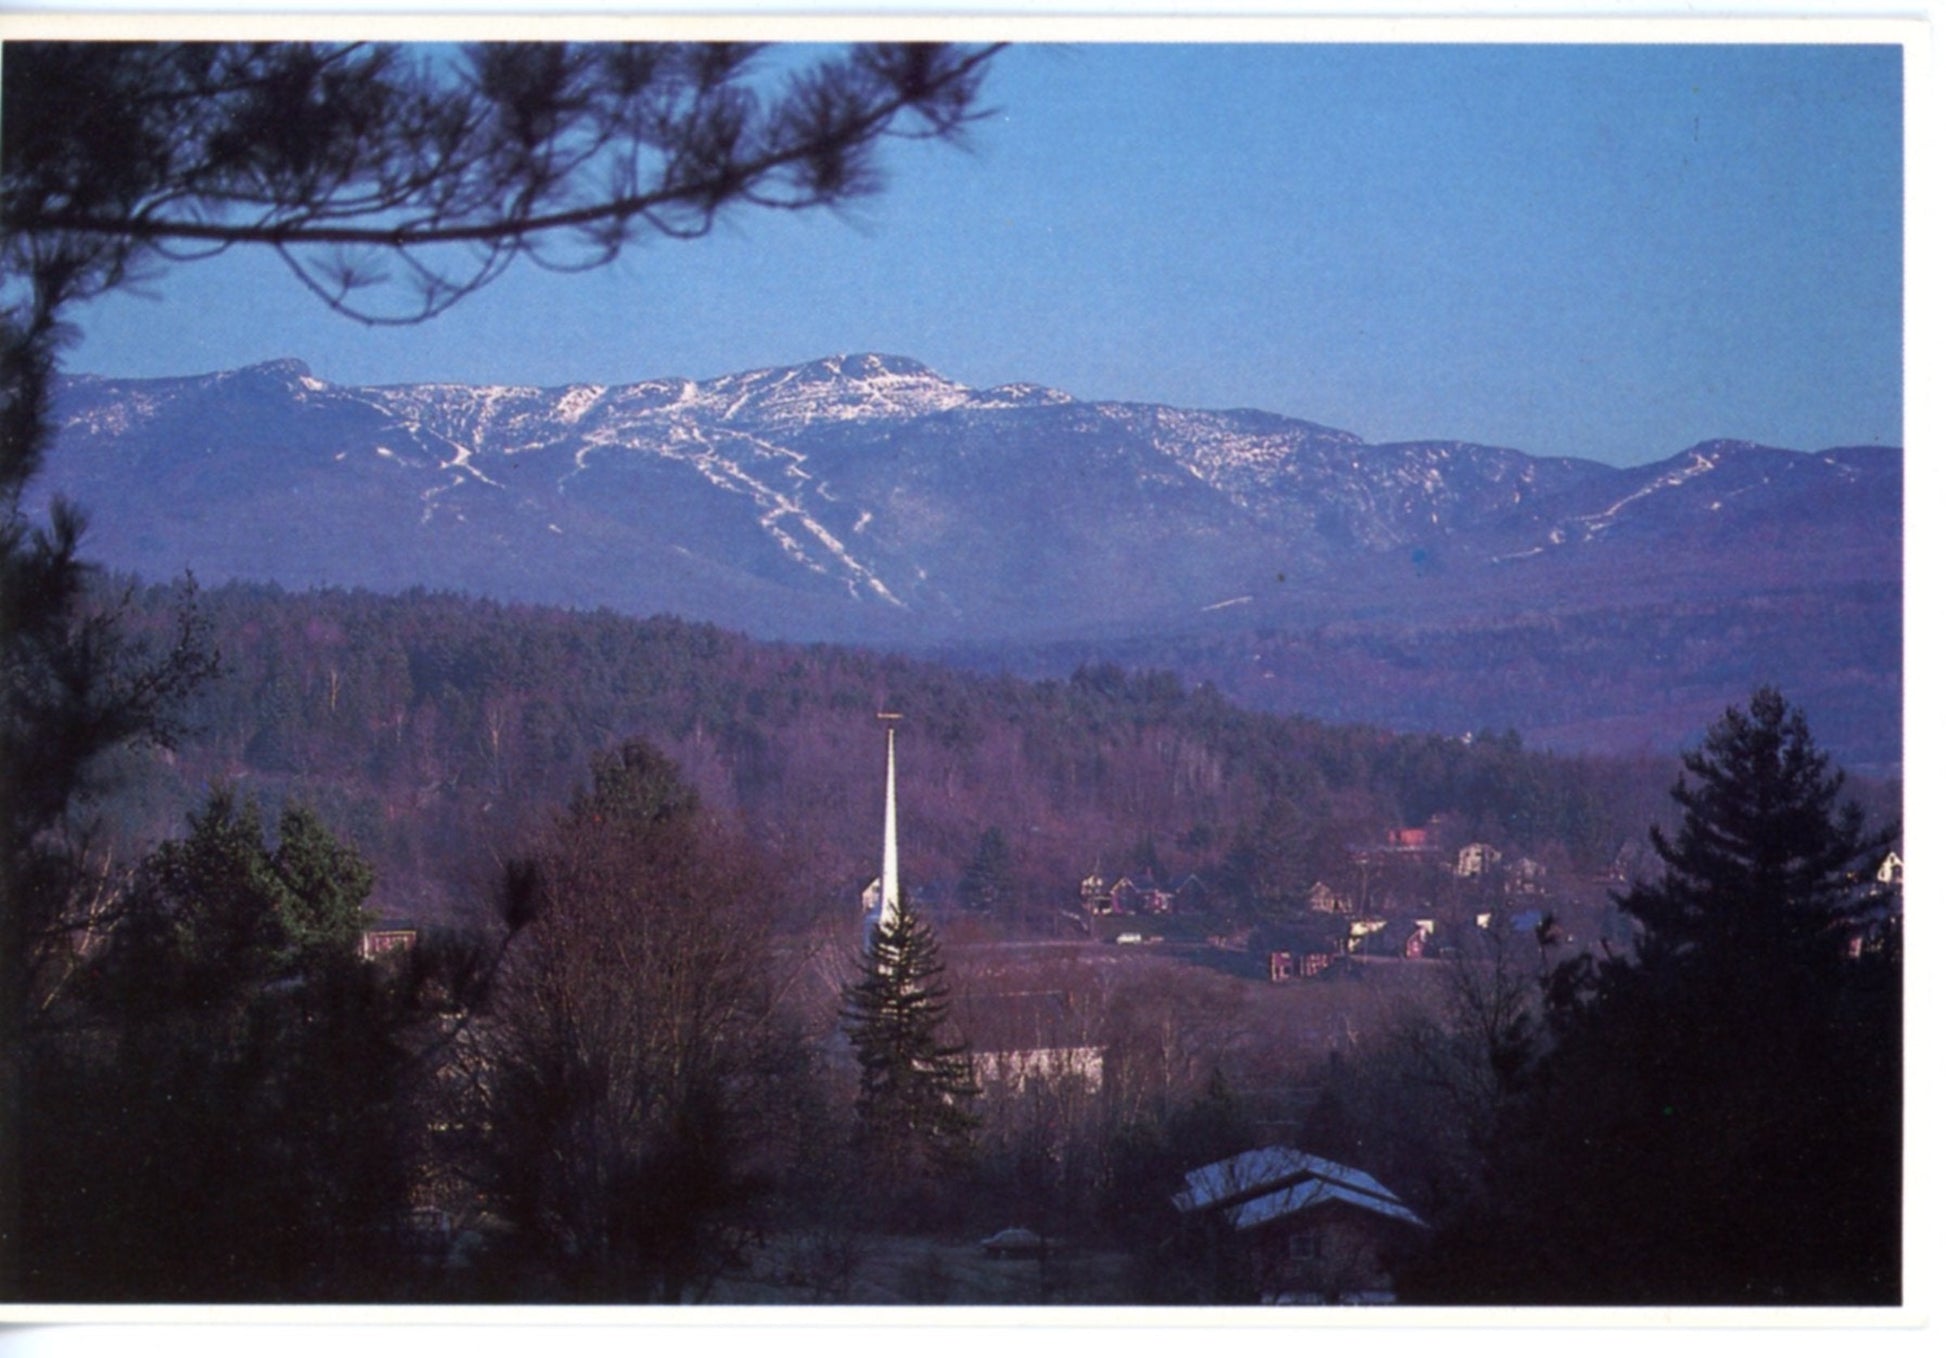 Stowe Village and Snowcapped Mt. Mansfield Trapp Family Lodge STOWE VERMONT Large Vintage Postcard 4" x 6"